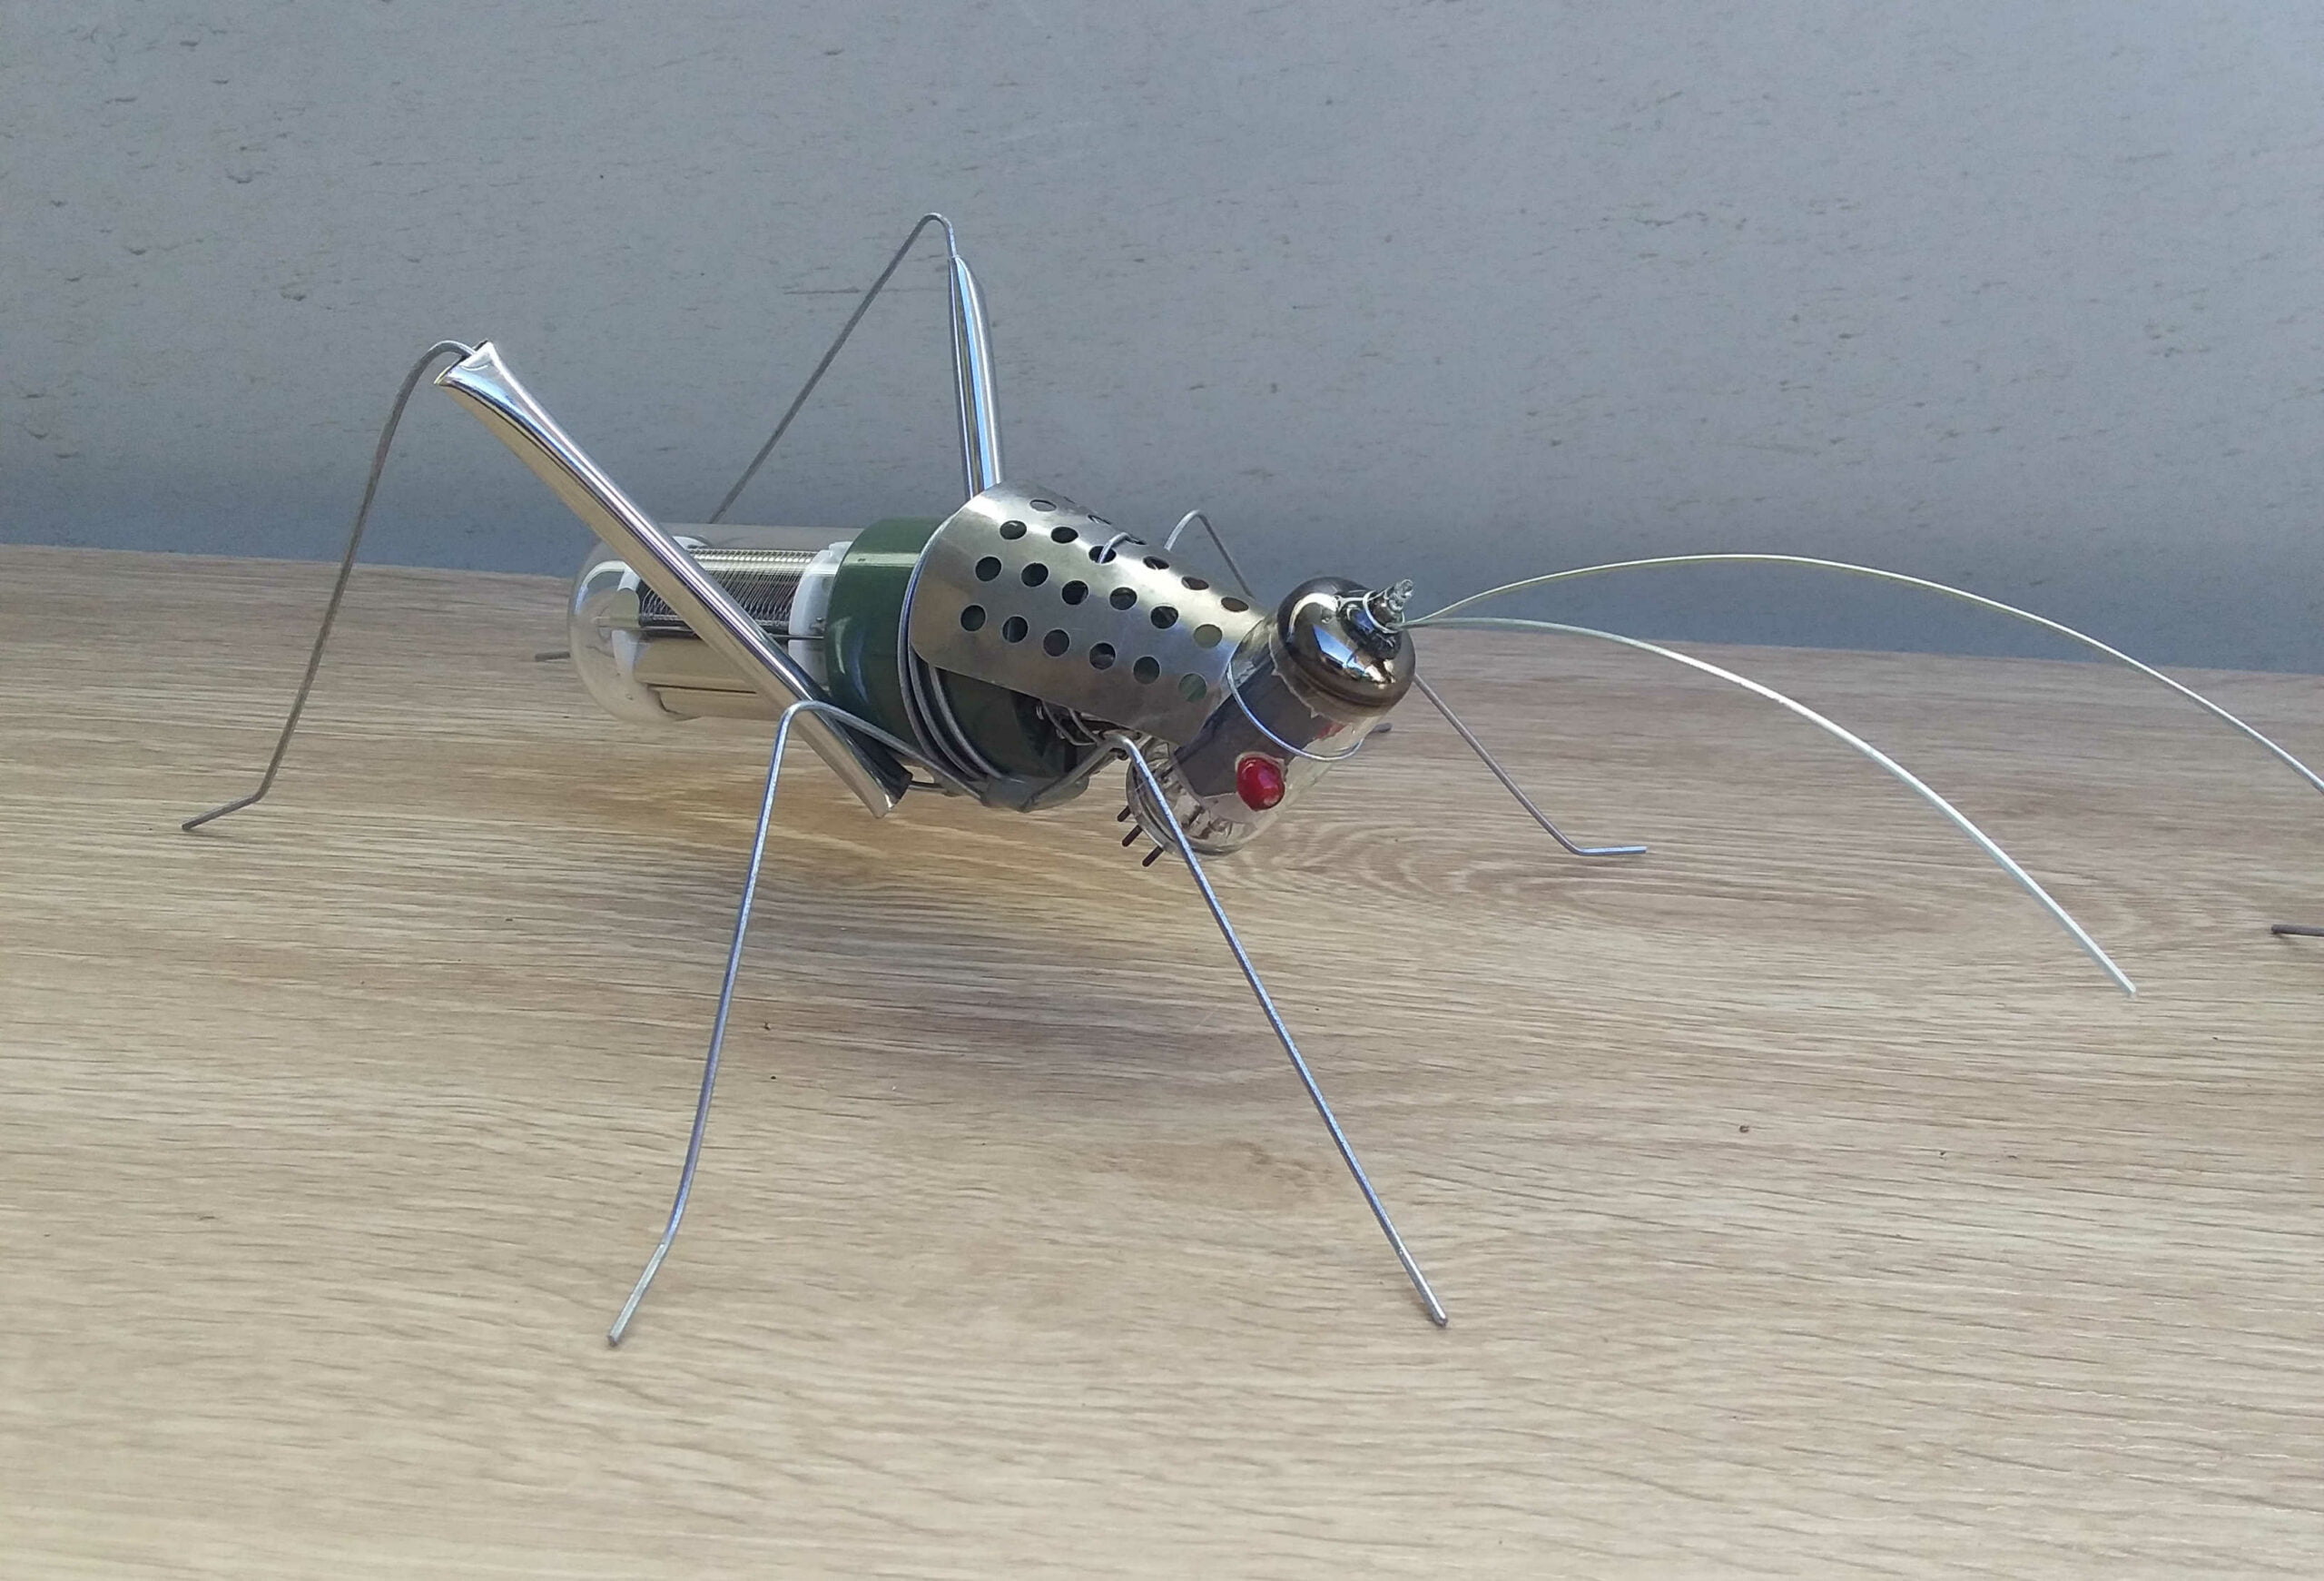 Grasshopper from 'Celebrating Diversity' by Libby Bloxham. It's constructed from recycled glass and electrical components, including tubular light bulbs for the body and head, radio antennae and wire.